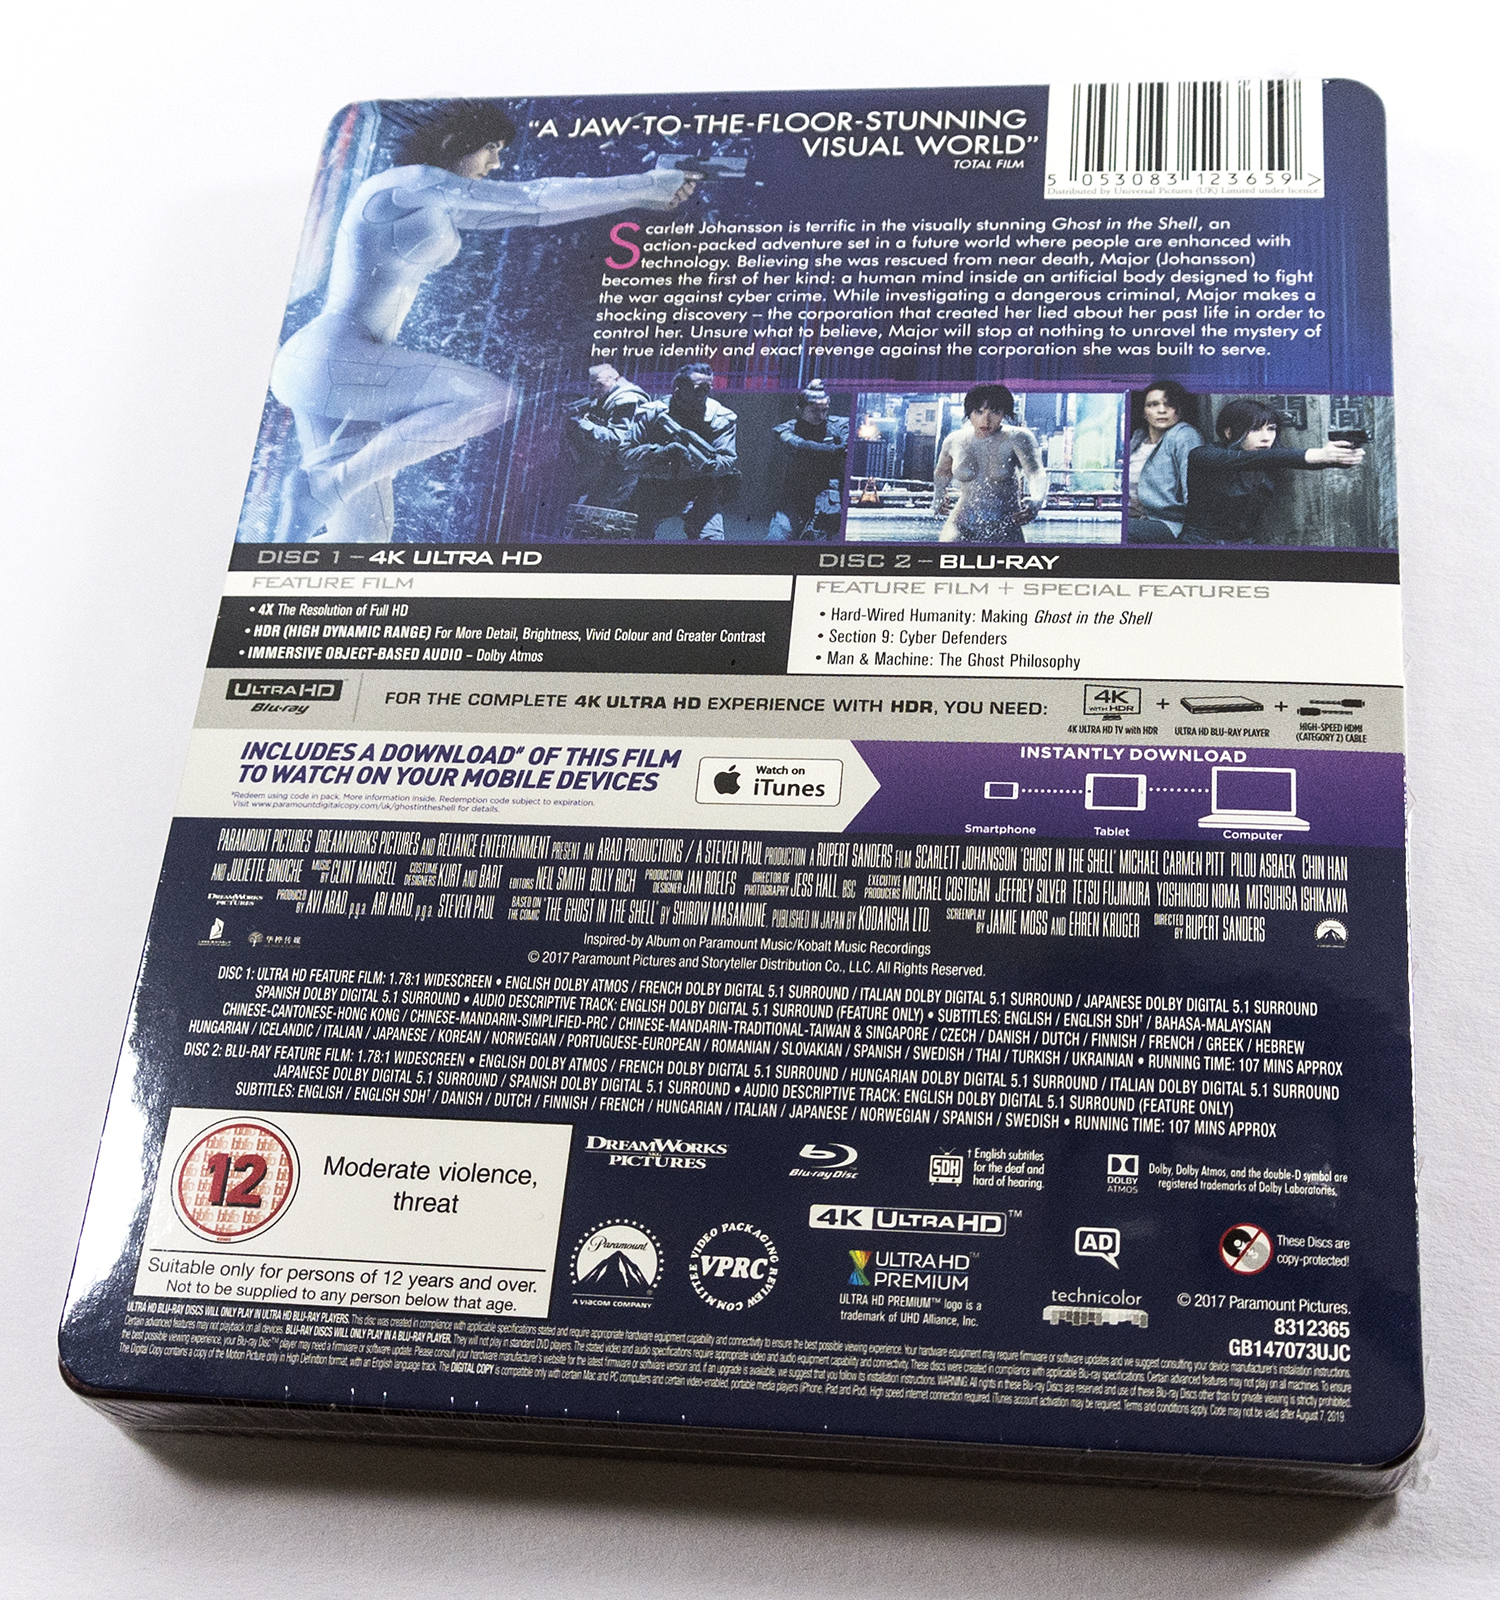 Ghost in the Shell steelbook ゴースト・イン・ザ・シェル<br> スチールブック